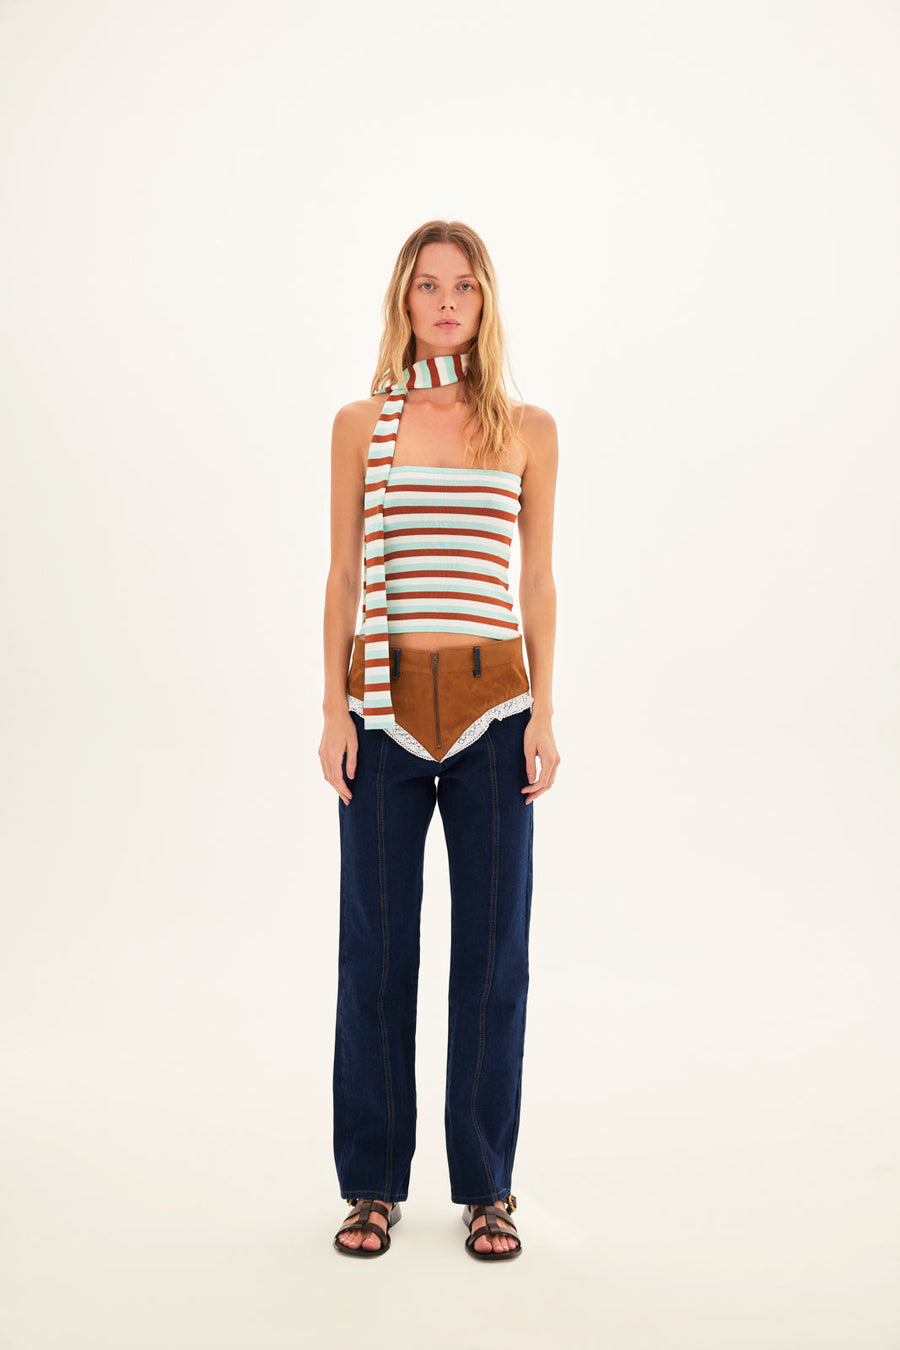 TIO - Striped strapless top with scarf